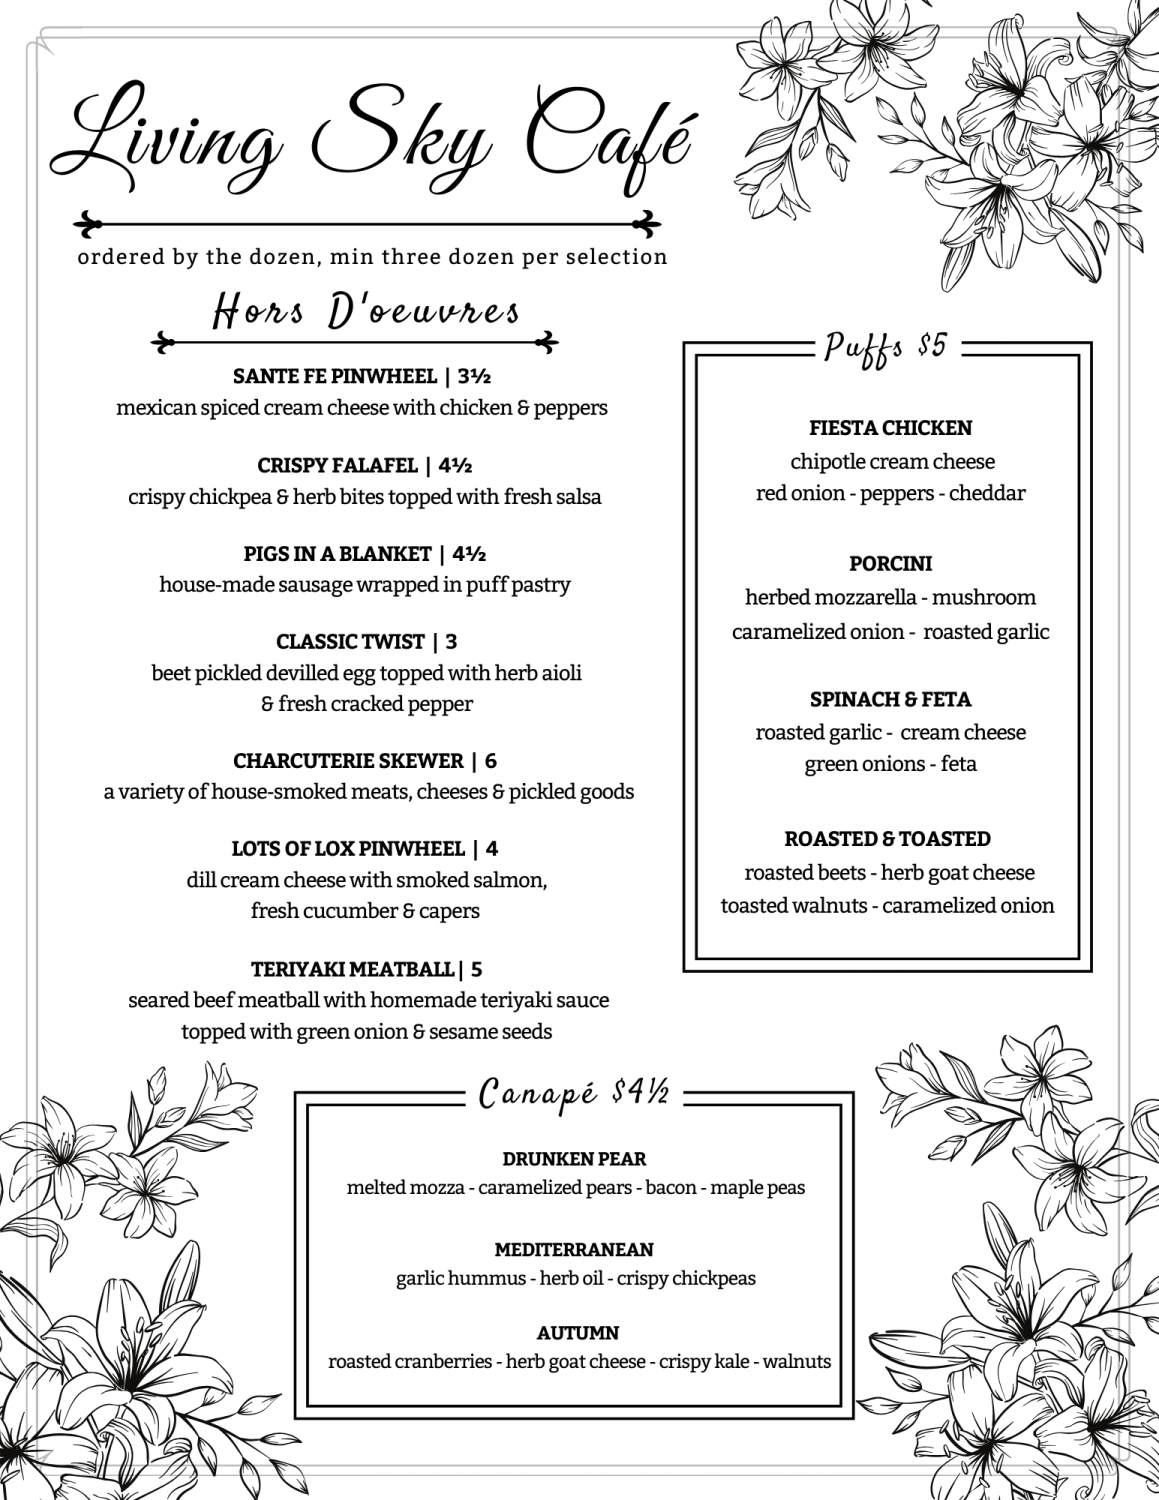 Hors D'oeuvres Wedding Menu. Includes vegan, vegetarian, gluten and dairy free options